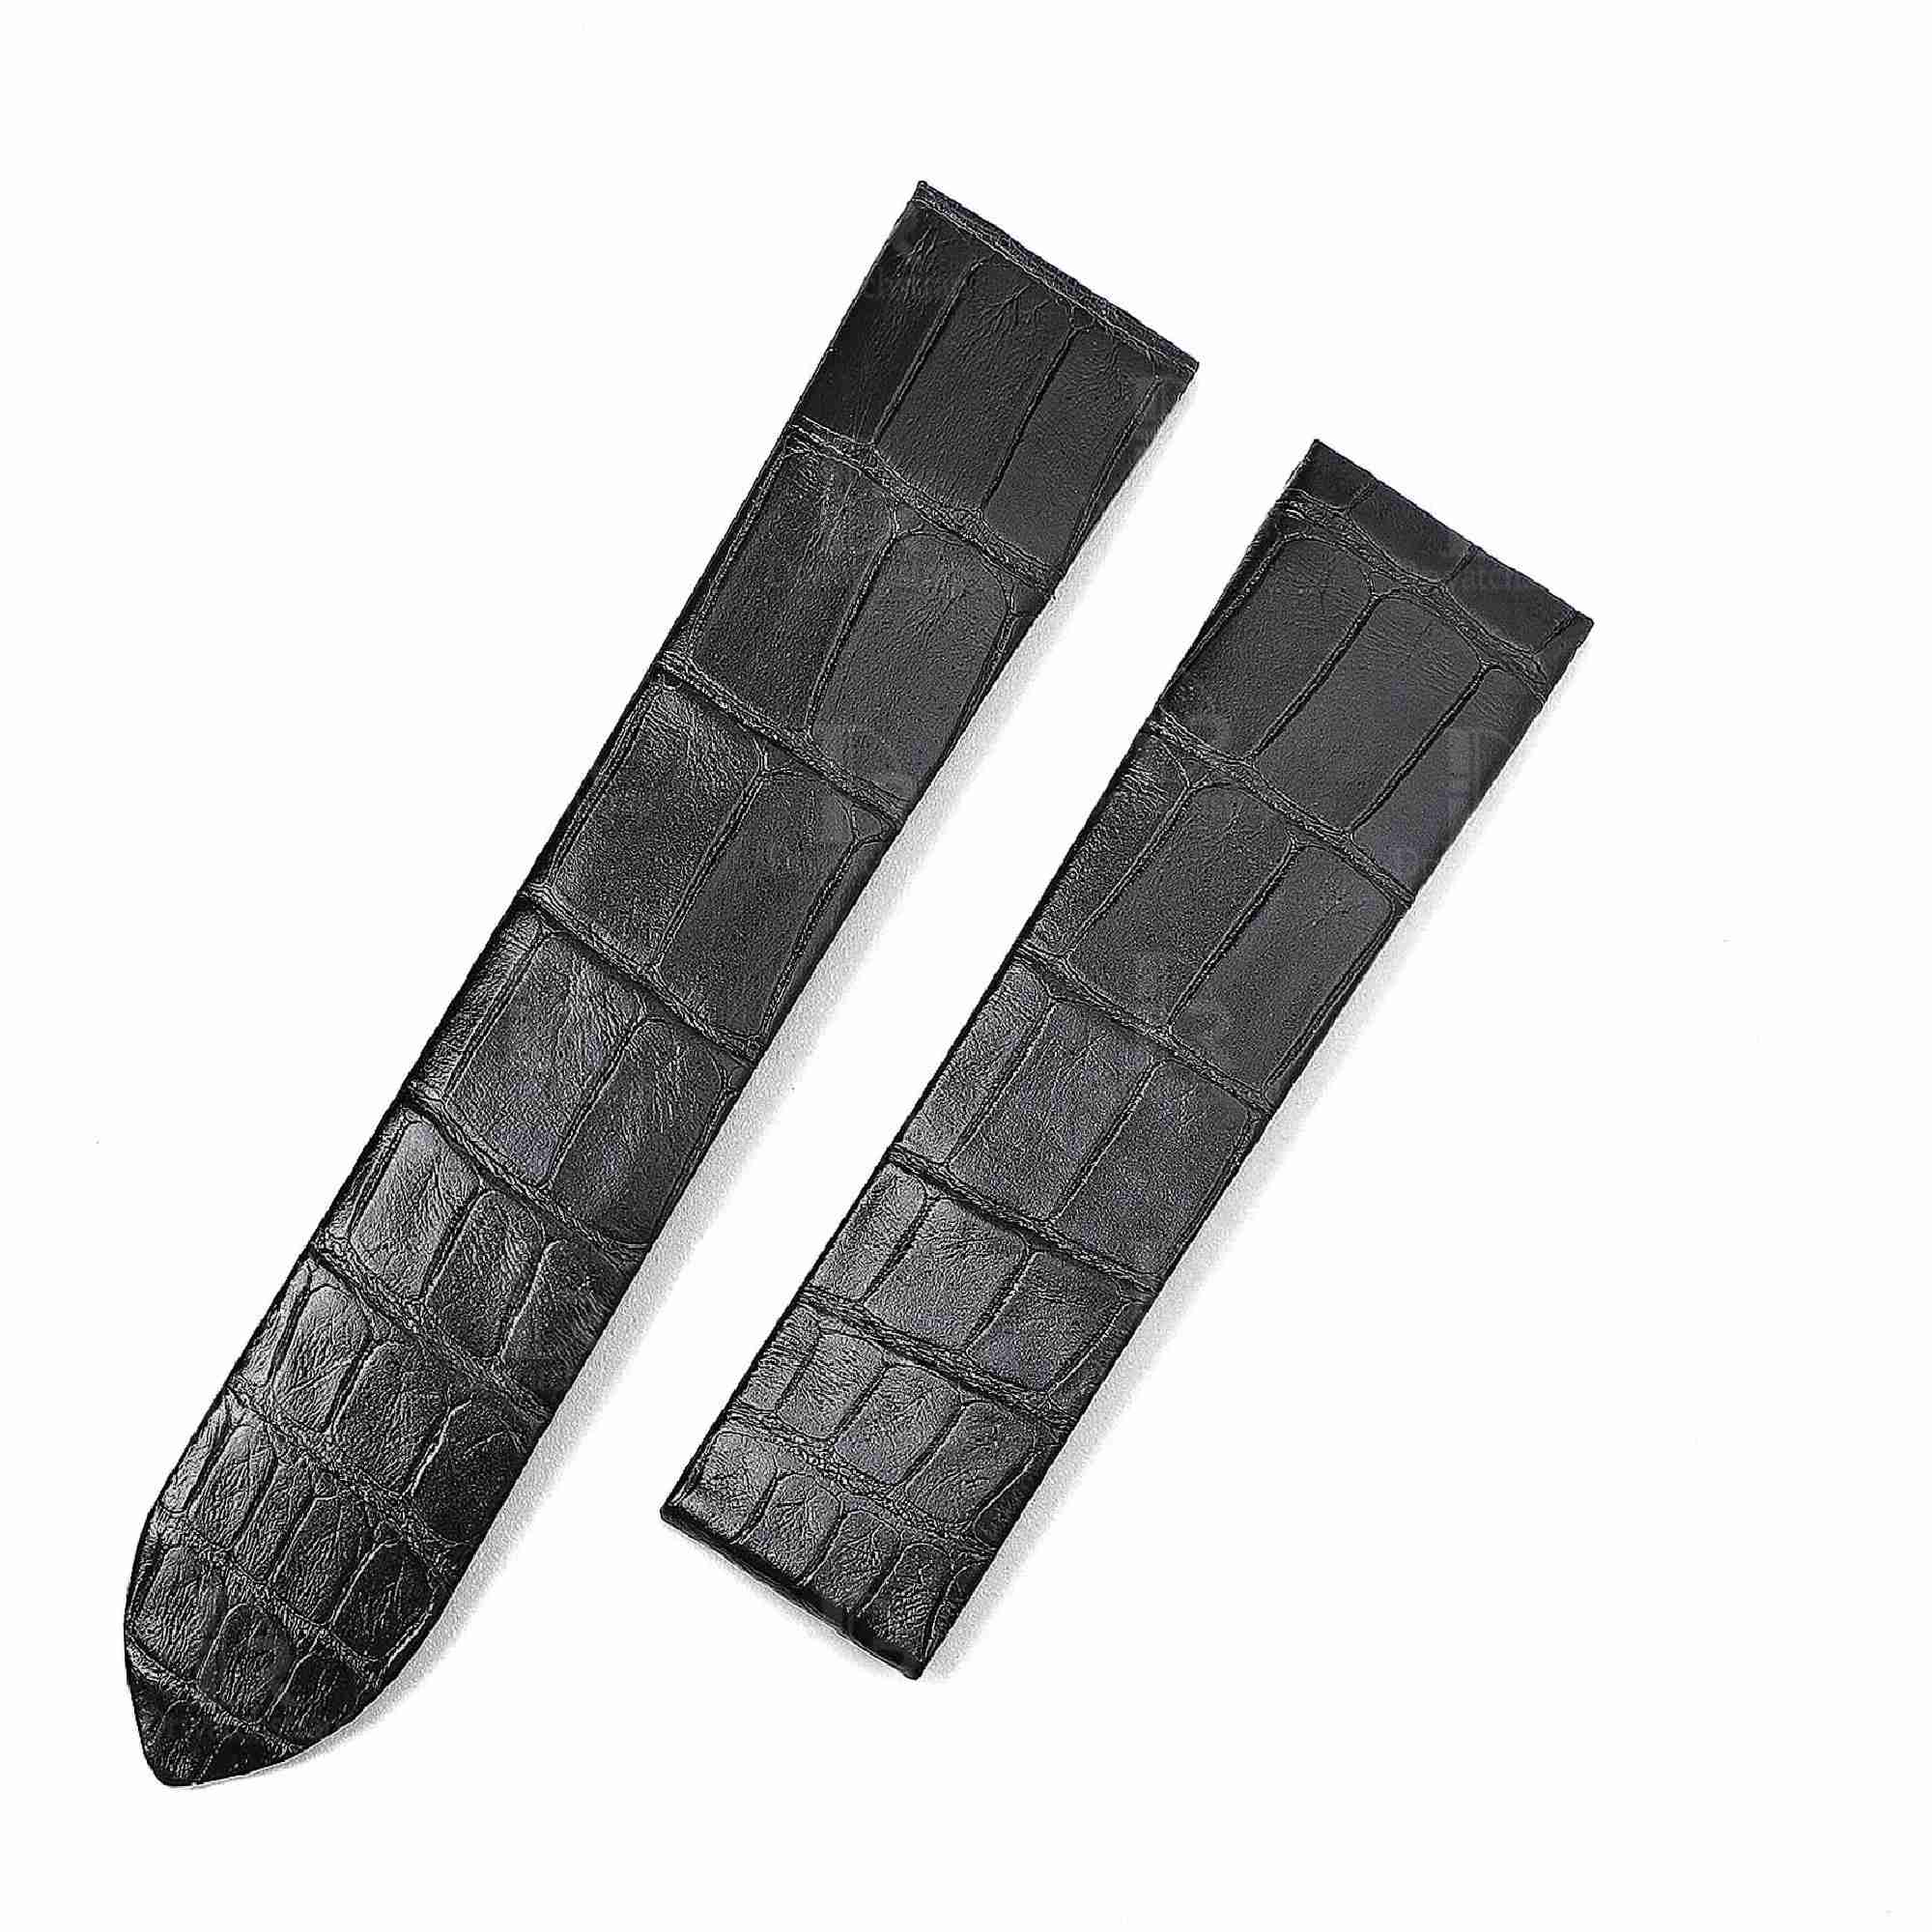 High-end genuine best quality OEM custom alligator leather black watch Cartier santos dumont strap and watch band replacement for Cartier Santos Dumont men's and women's watches for sale - Shop the premium Square-scale straps and watch bands at a low price